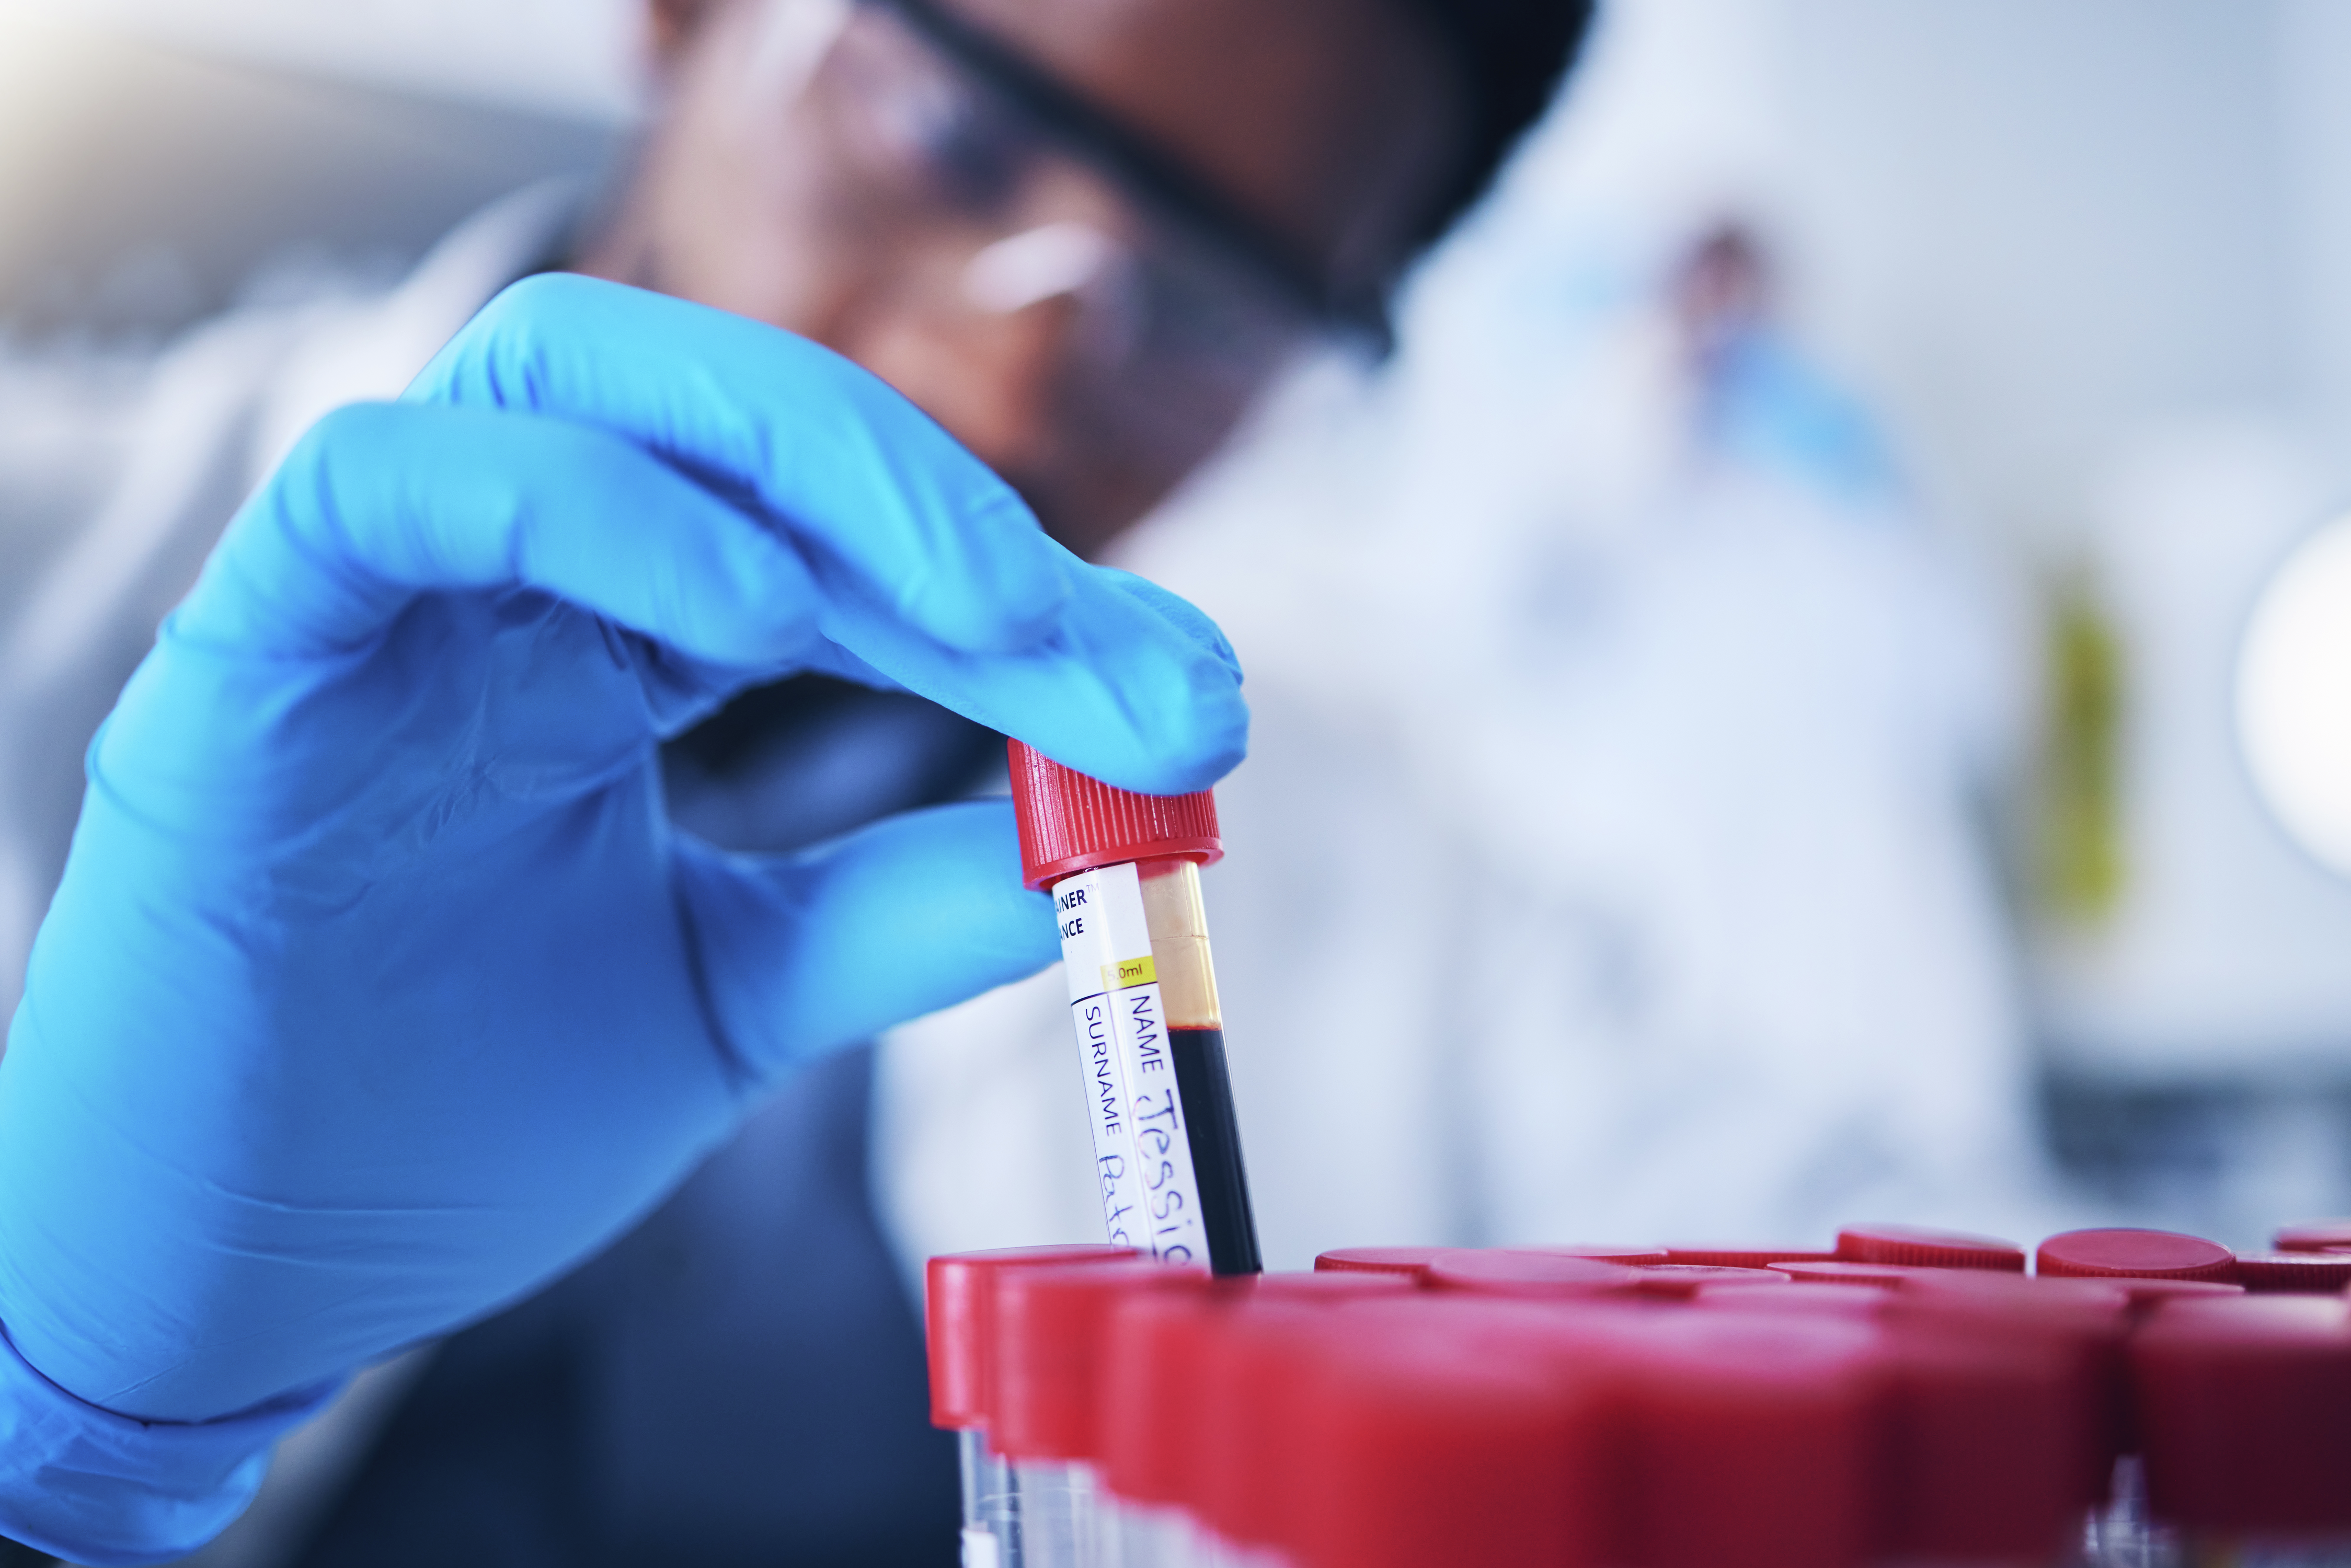 ON THE RECORD: FDA approves blood test that screens for colon cancer